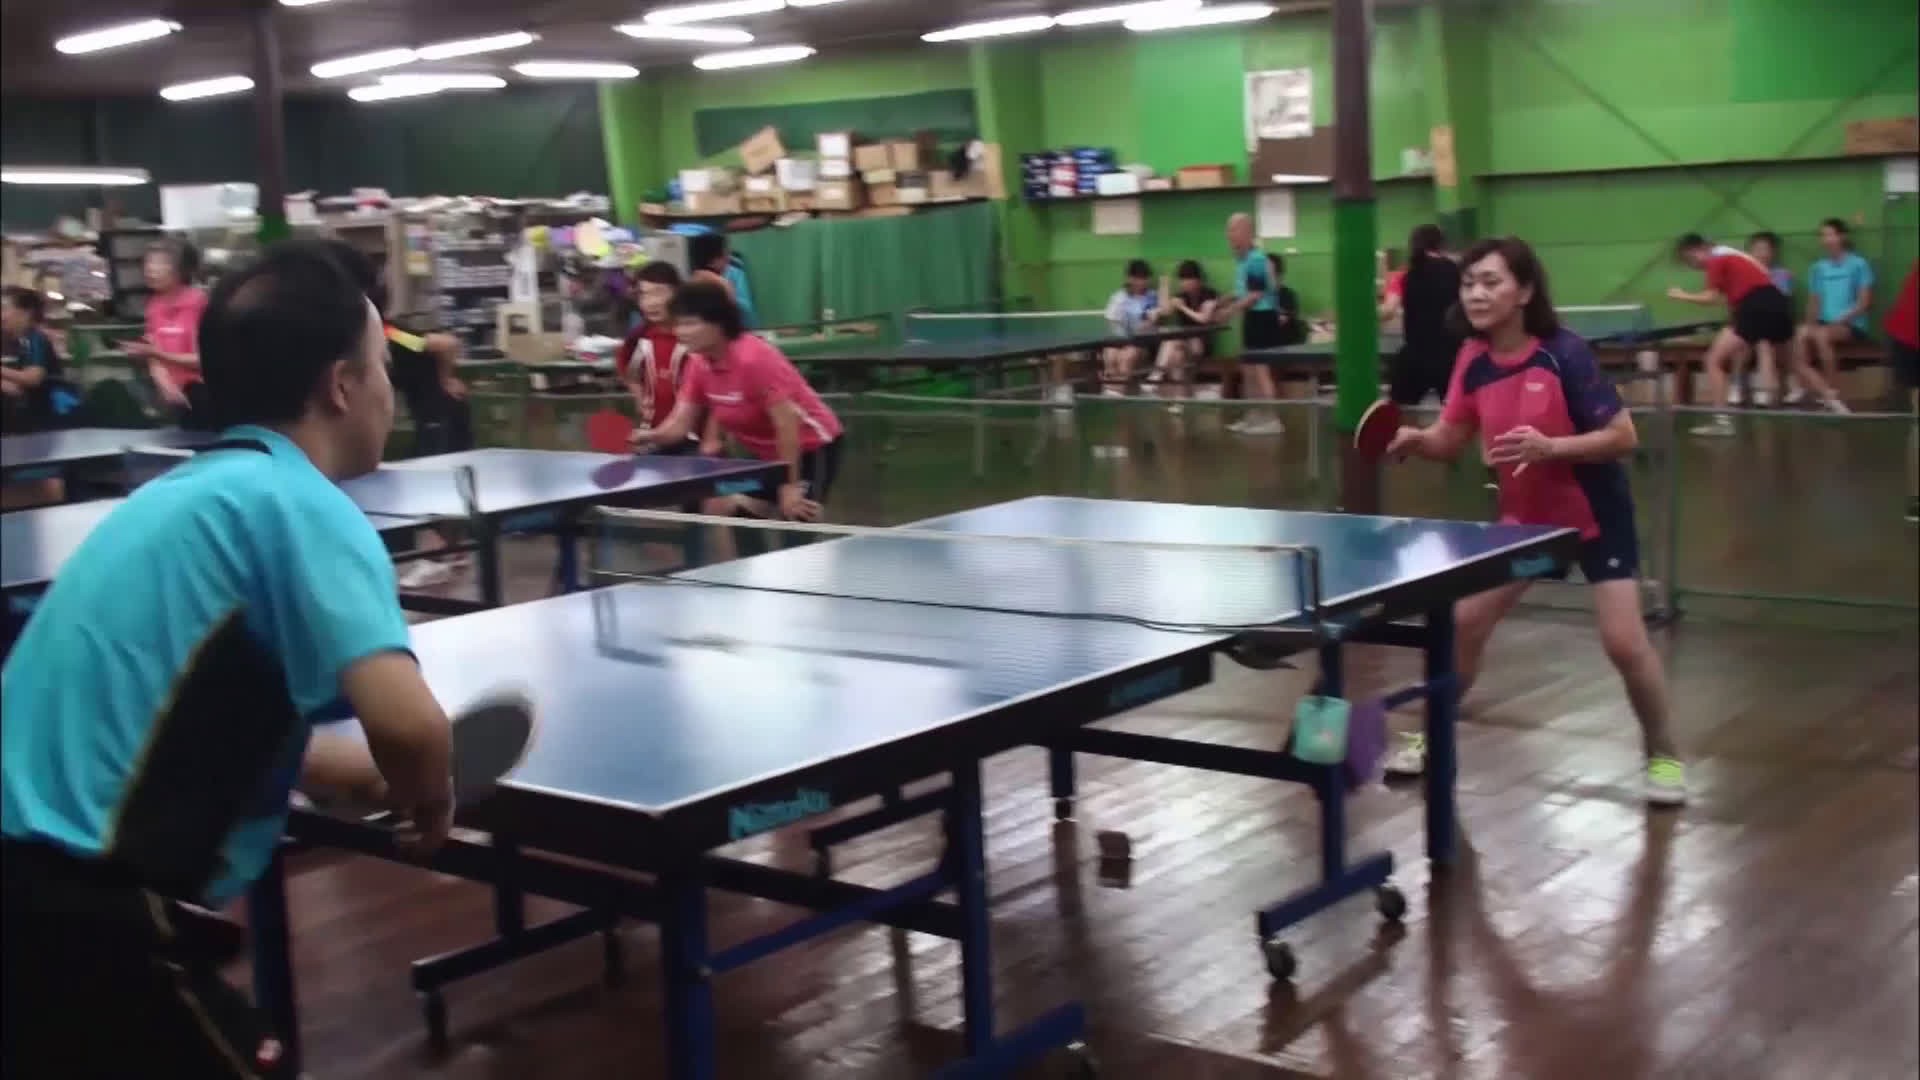 Table tennis by face